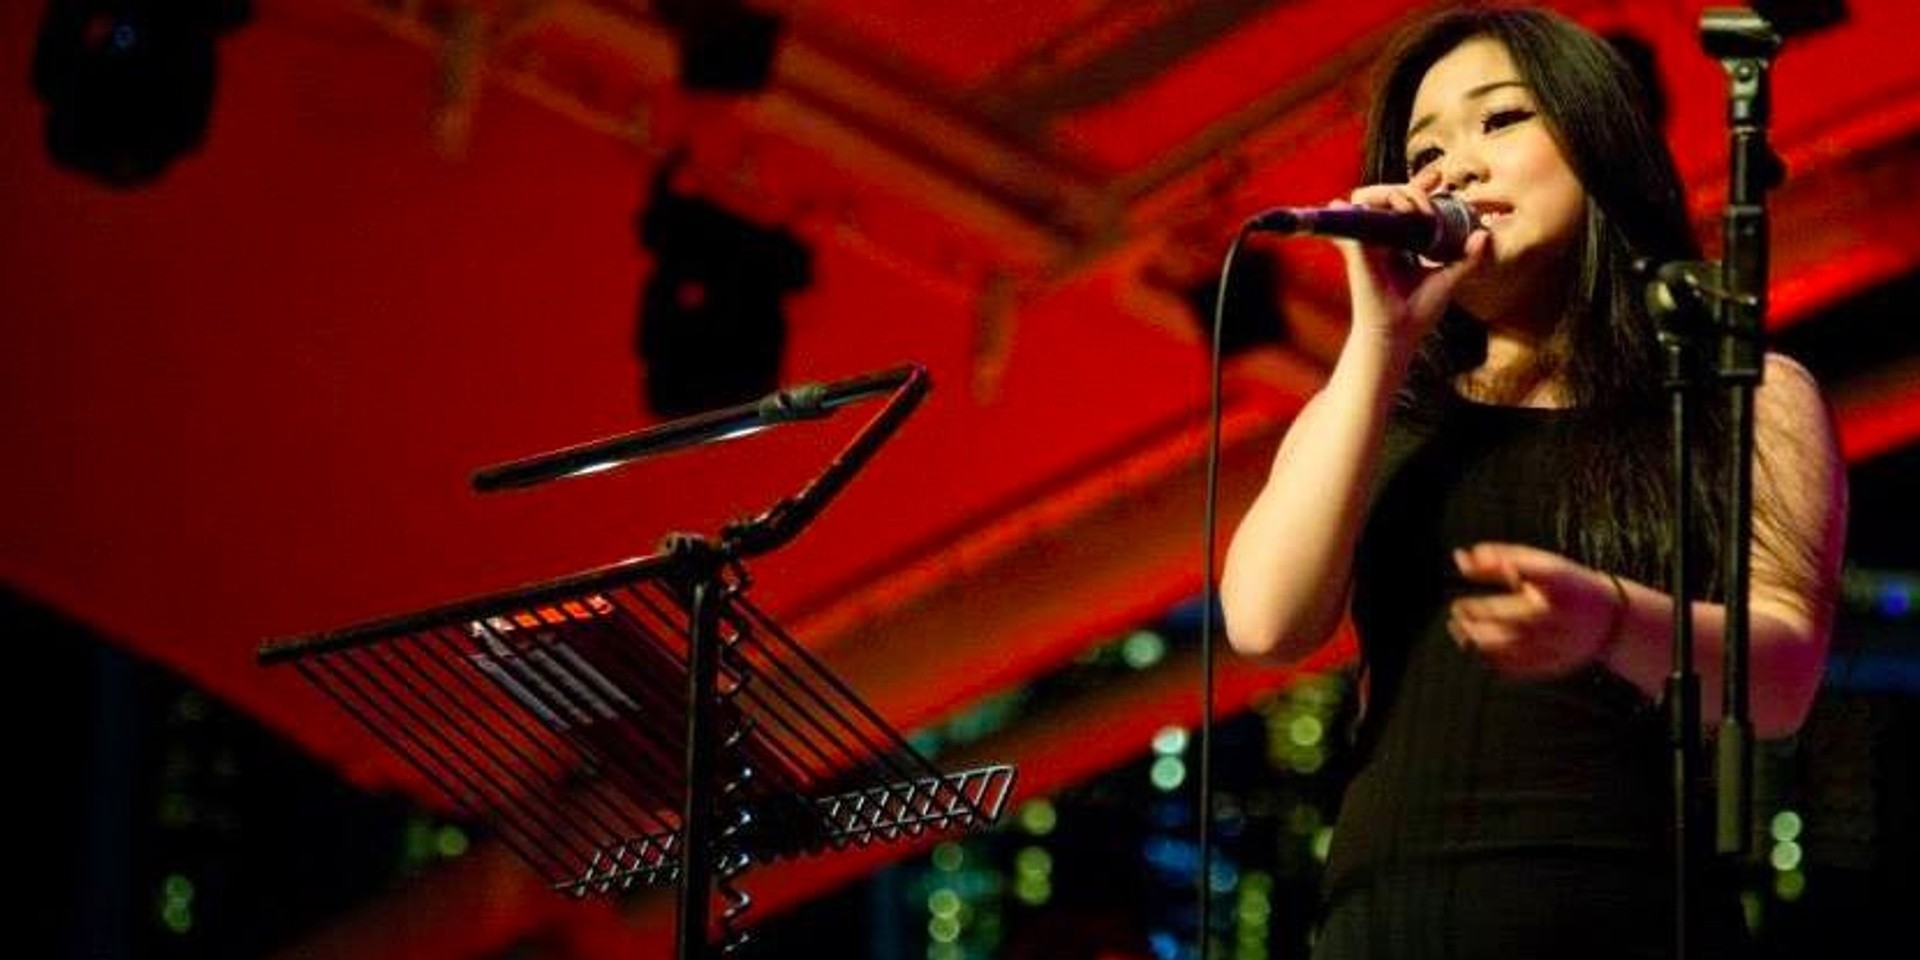 Fifth Singaporean chosen for Sing! China before being dropped